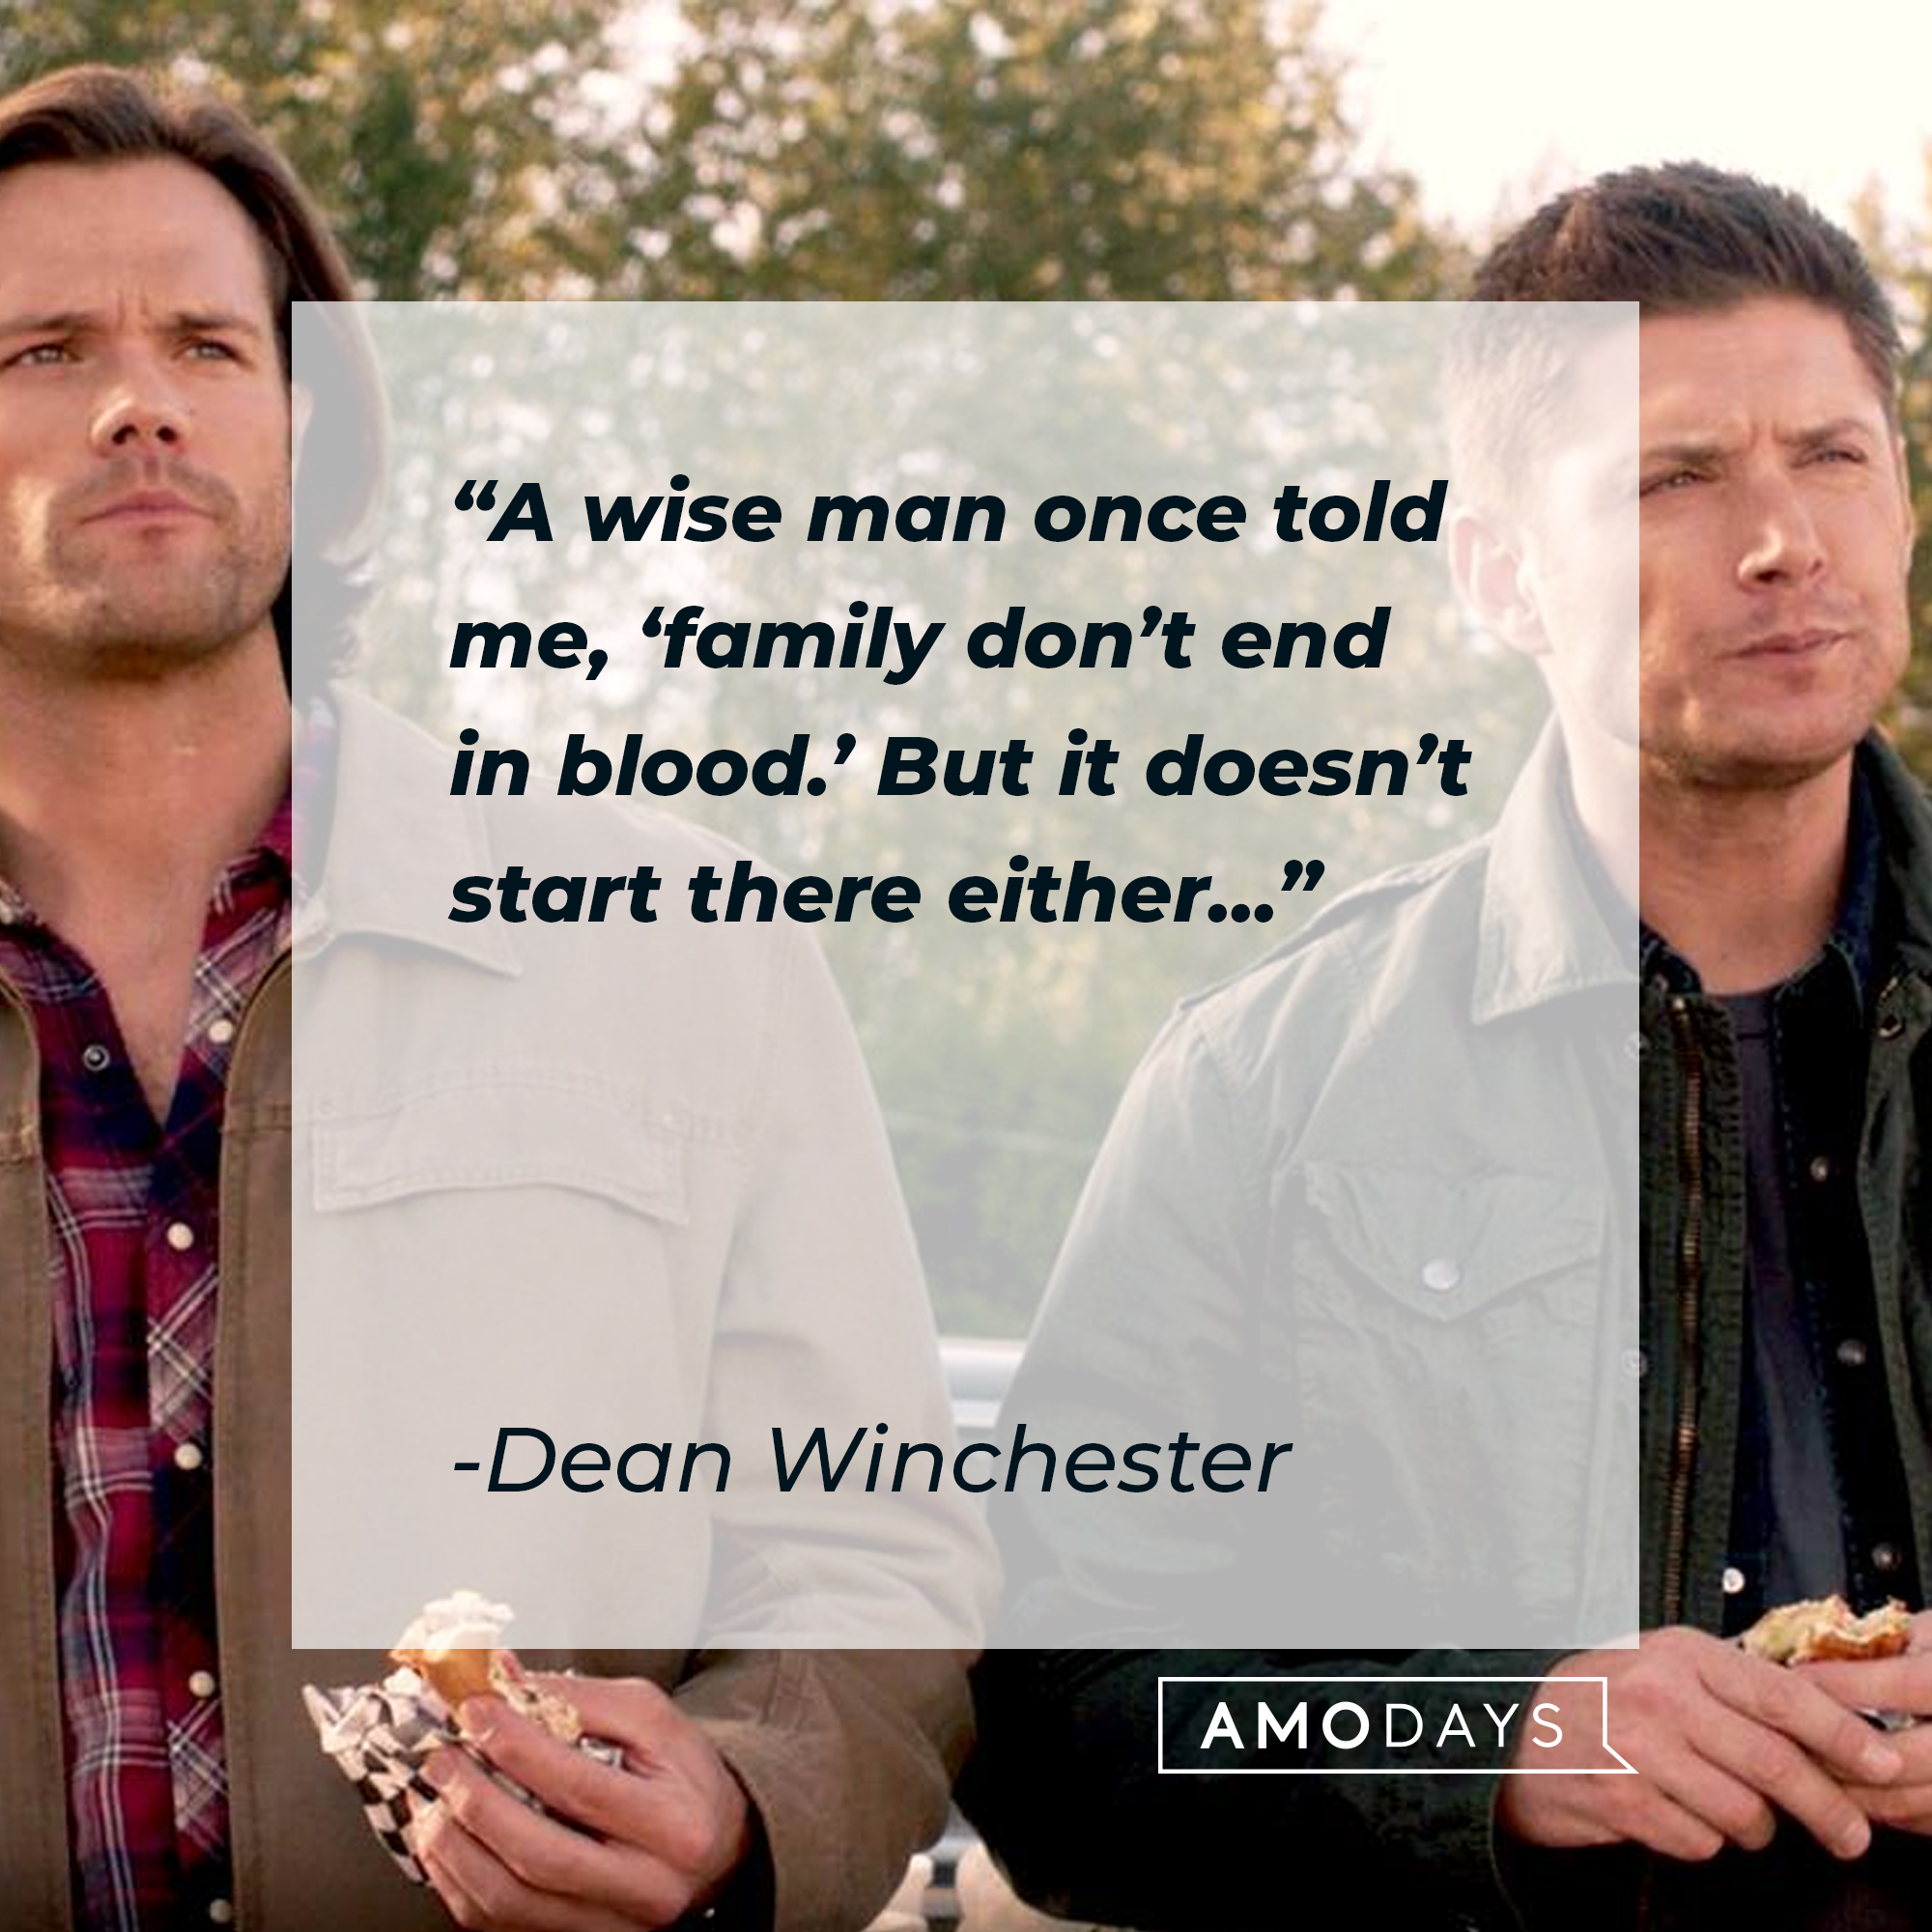 Sam and Dean Winchester, with Dean's quote: “A wise man once told me, ‘family don’t end in blood.’ But it doesn’t start there either…”  | Source: Facebook.com/Supernatural